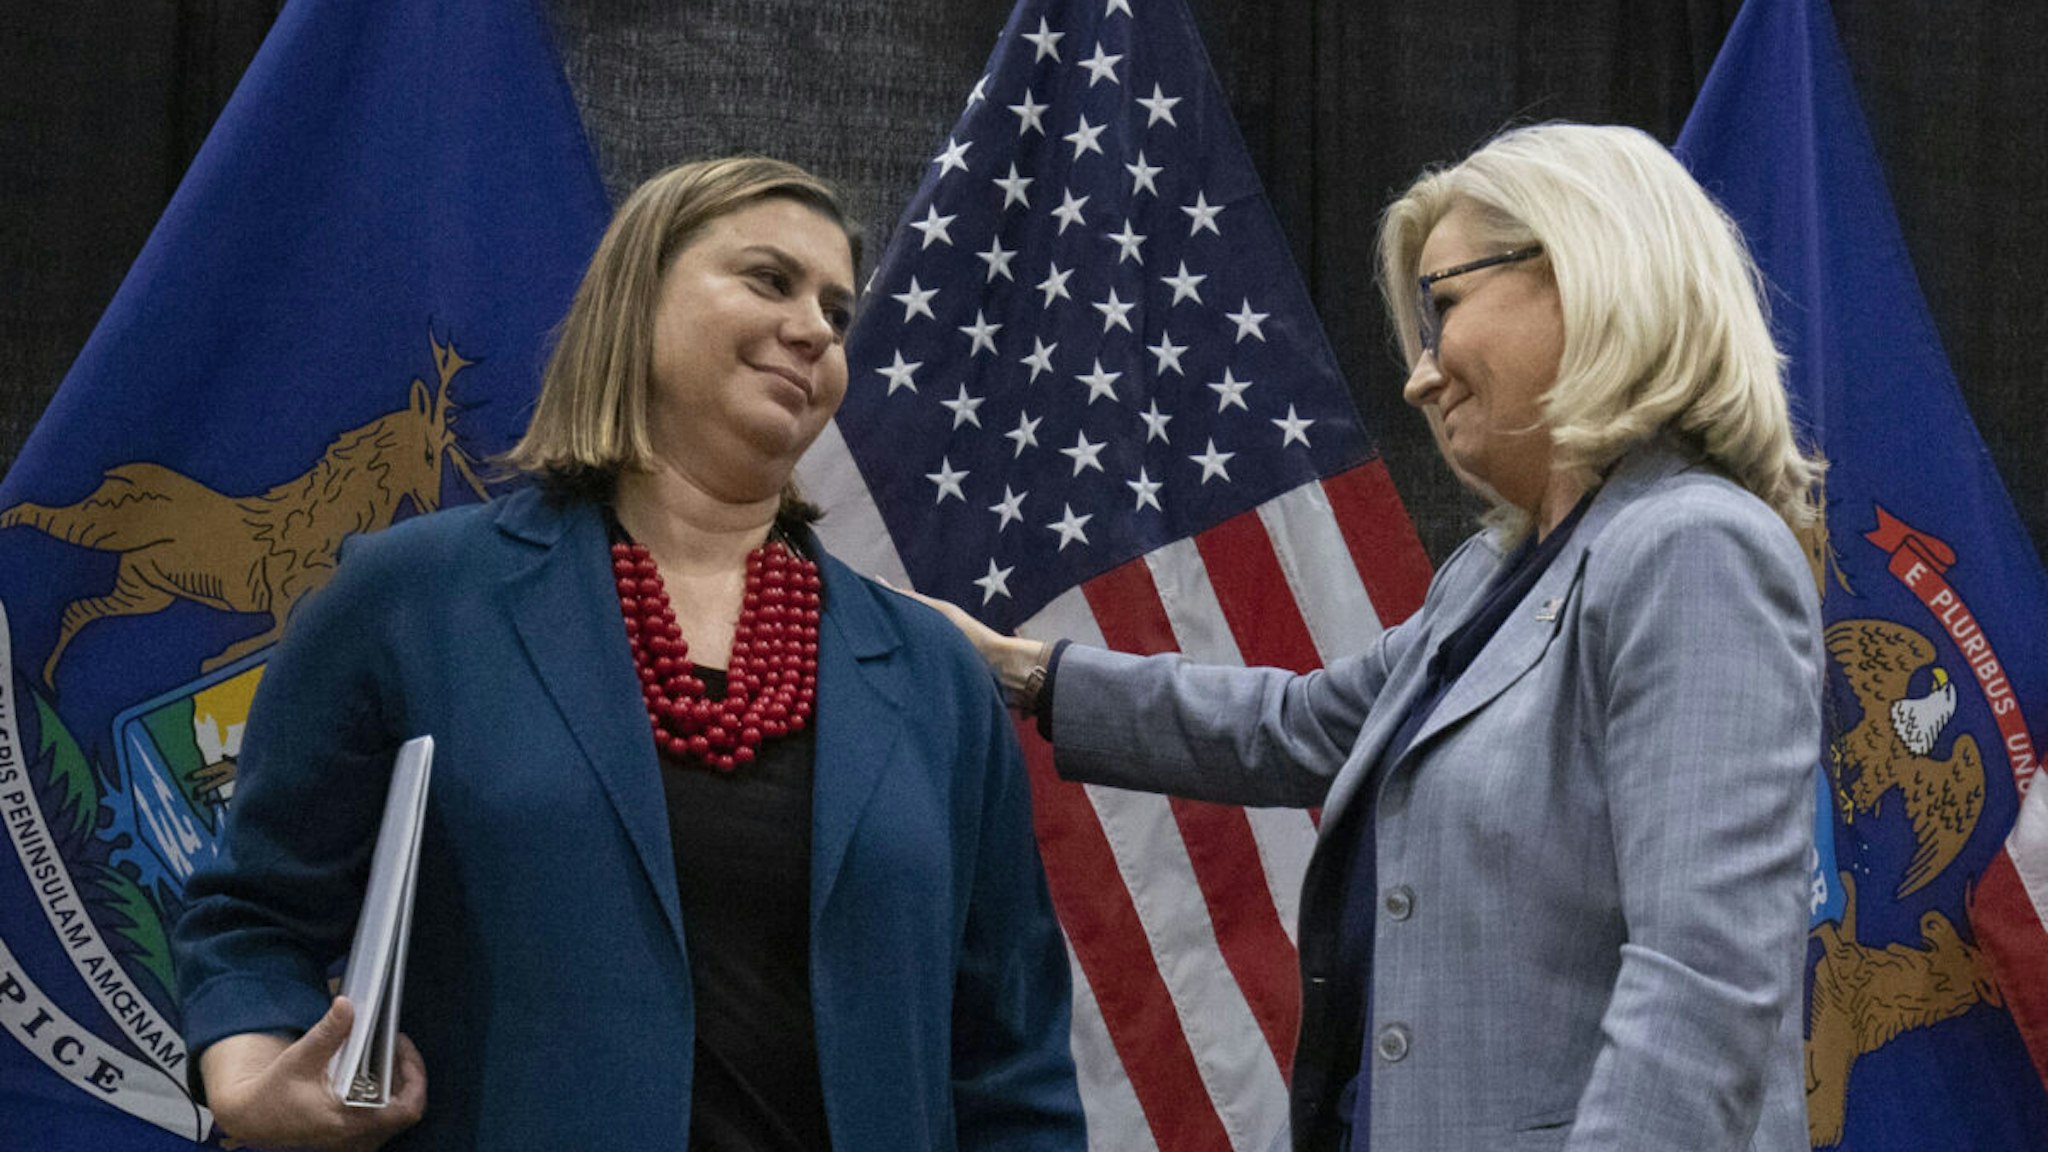 Rep. Liz Cheney (R-WY) (right) campaigns with Rep. Elissa Slotkin (D-MI) at an Evening for Patriotism and Bipartisanship event on November 1, 2022 in East Lansing, Michigan